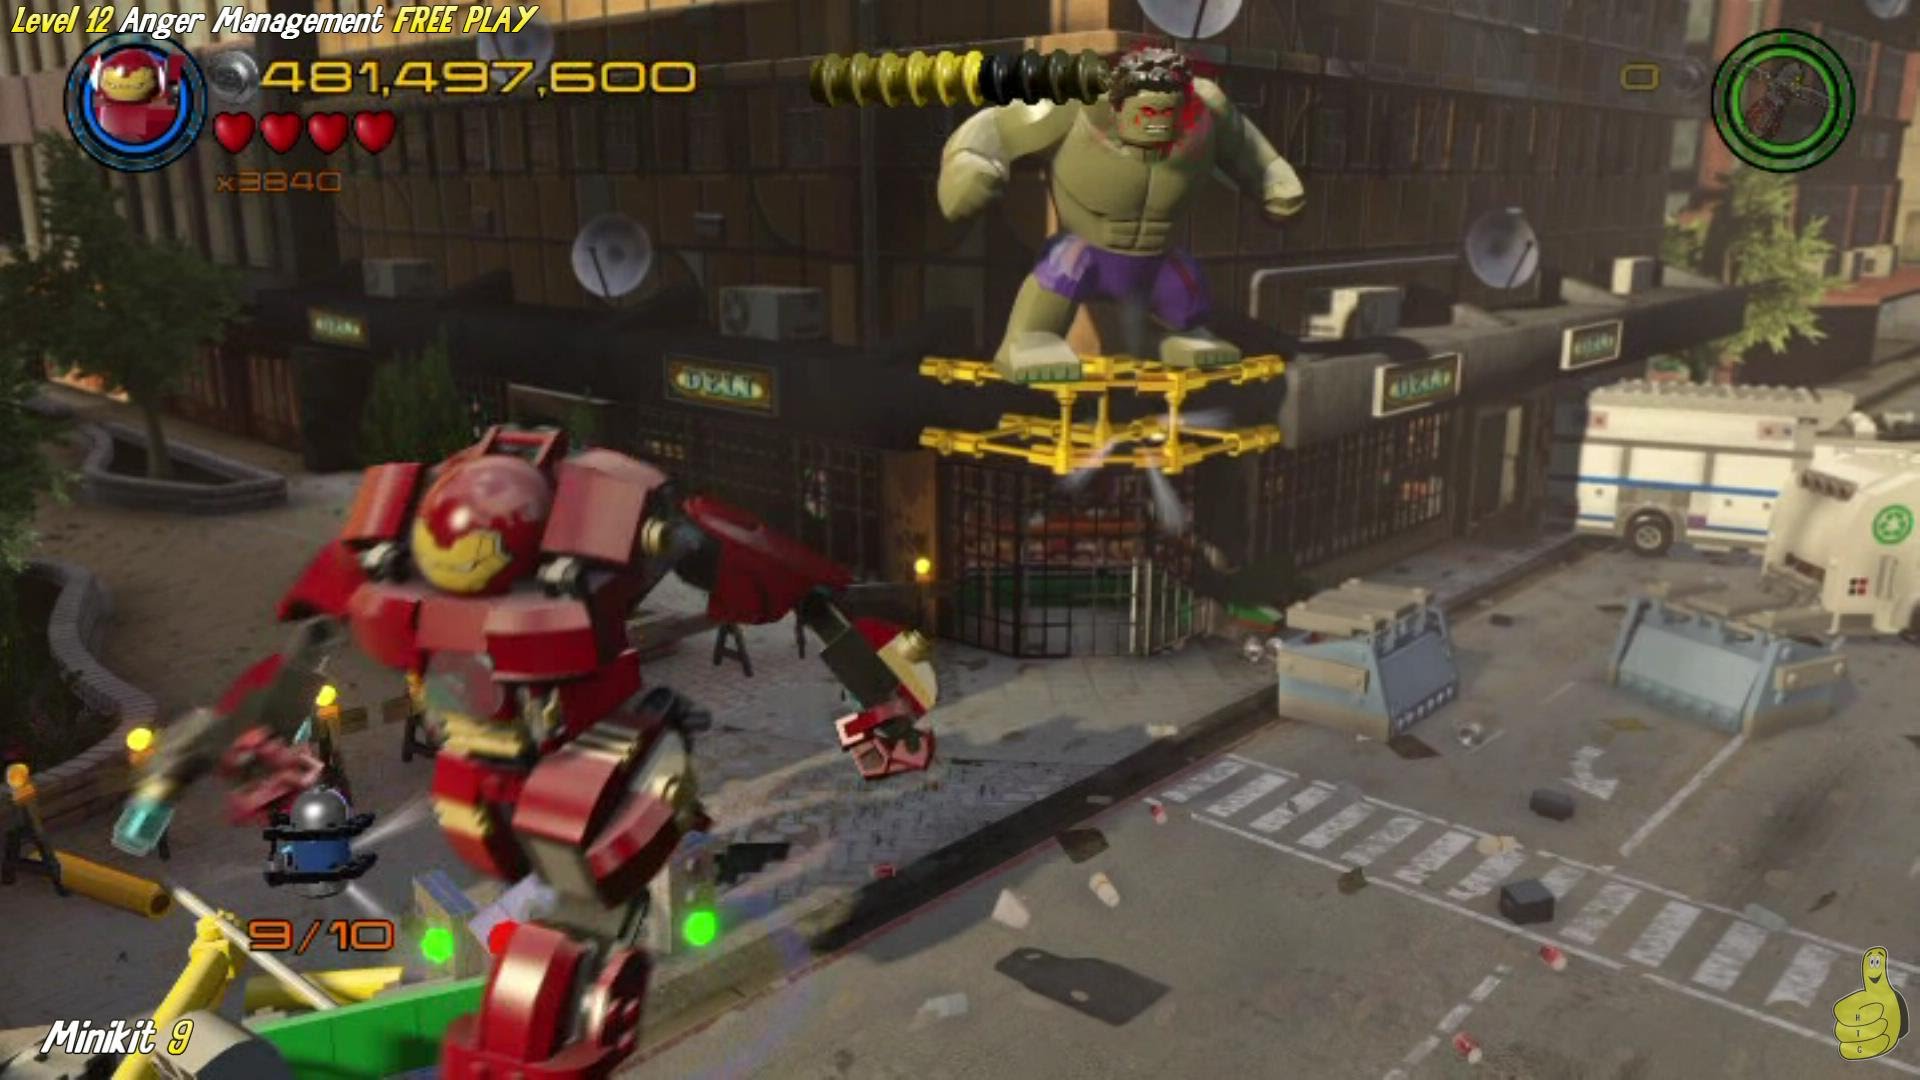 Lego Marvel Avengers: Lvl 12 / Anger Management FREE PLAY (All Collectibles) – HTG